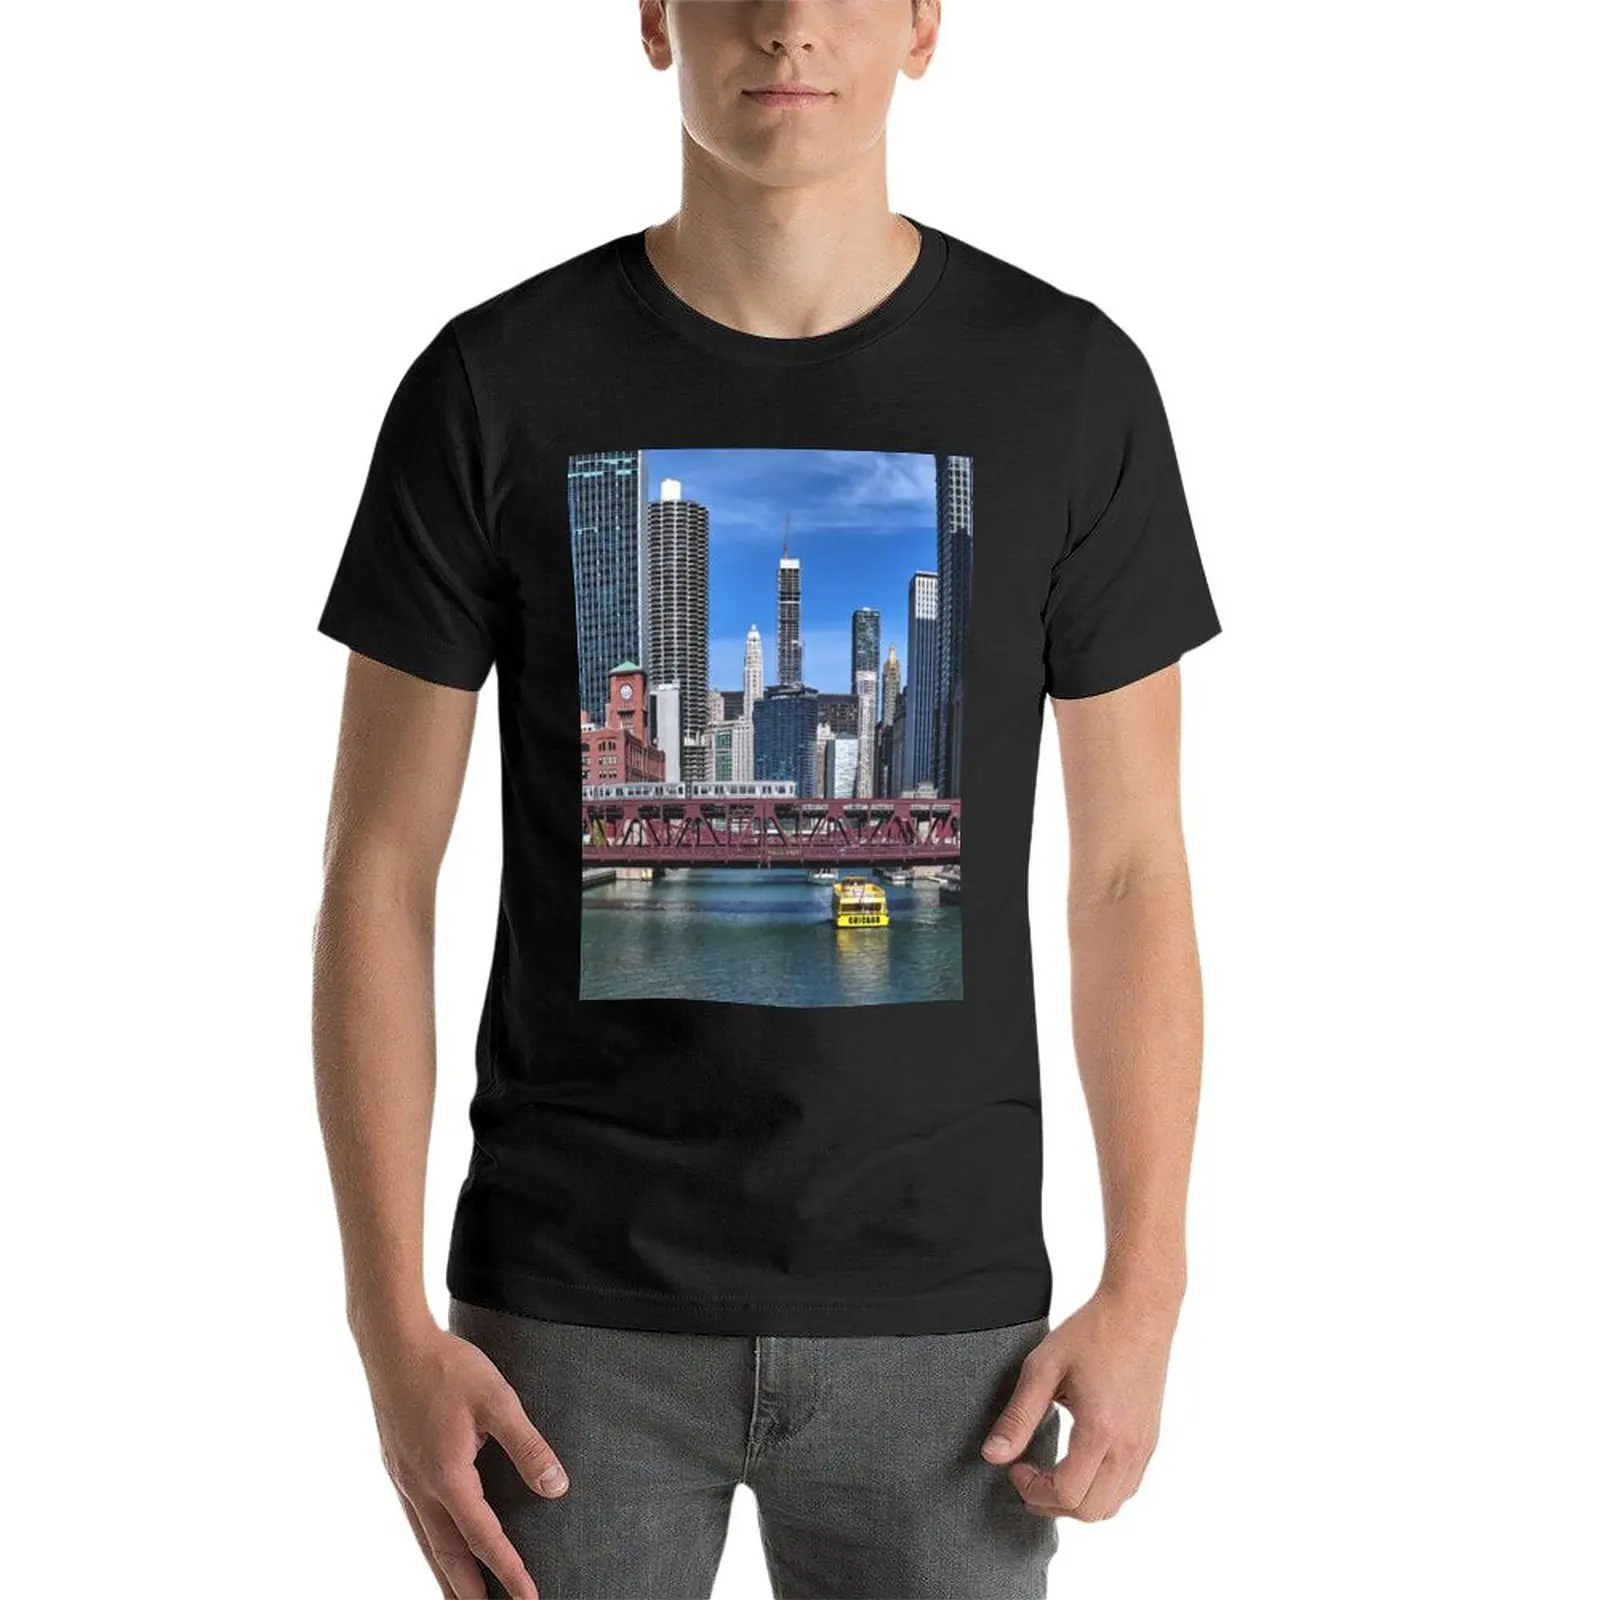 Chicago, Illinois, US - Chicago Skyline & Chicago River T-Shirt funny t shirts Short t-shirt T-shirts for men cotton